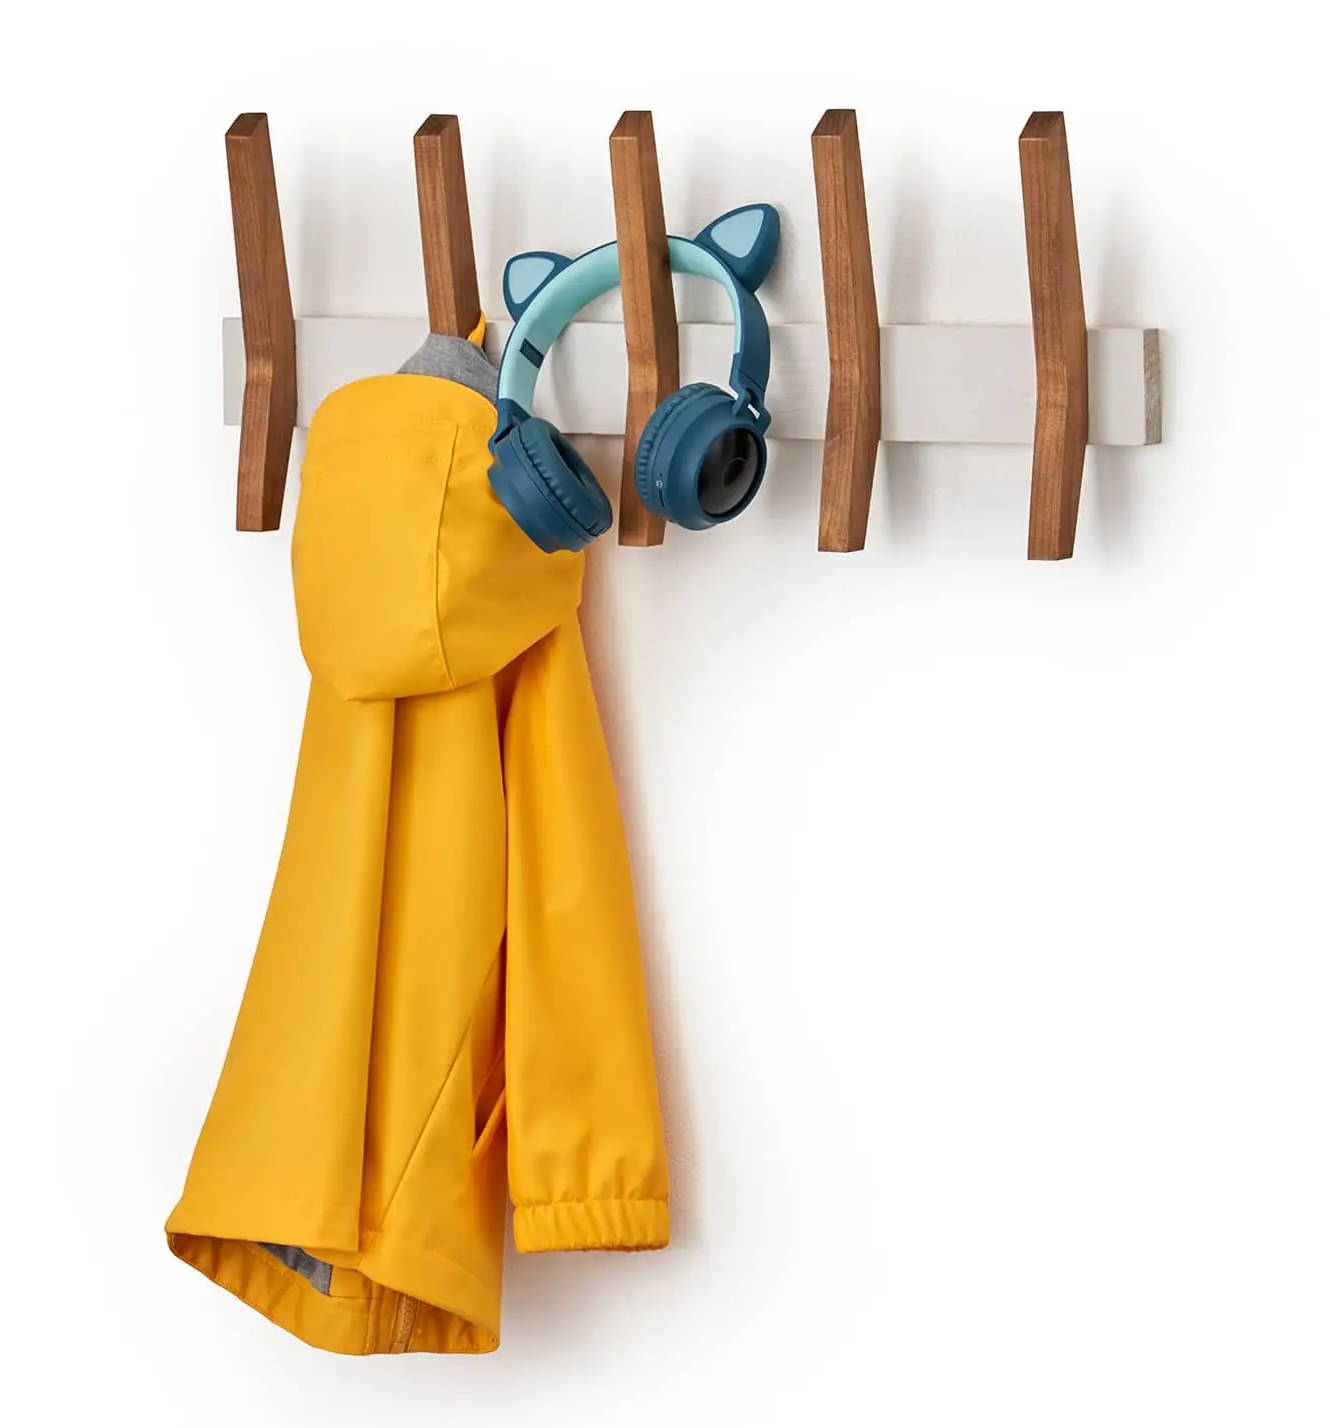 wood wall rack with 5 hooks, with a coat and headphones hanging